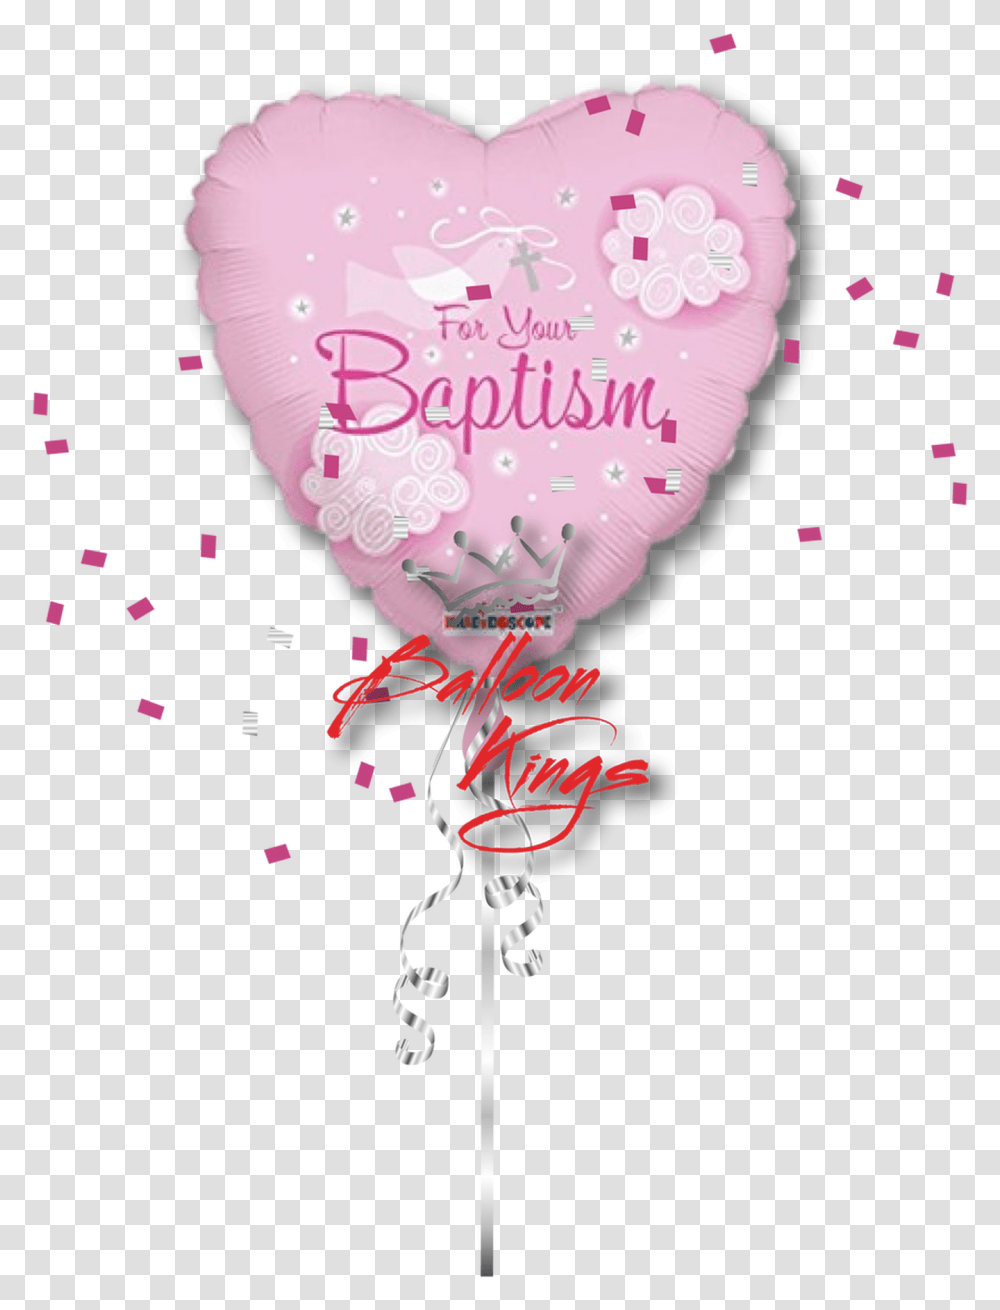 For Your Baptism Girl Portable Network Graphics, Balloon, Paper, Poster, Advertisement Transparent Png